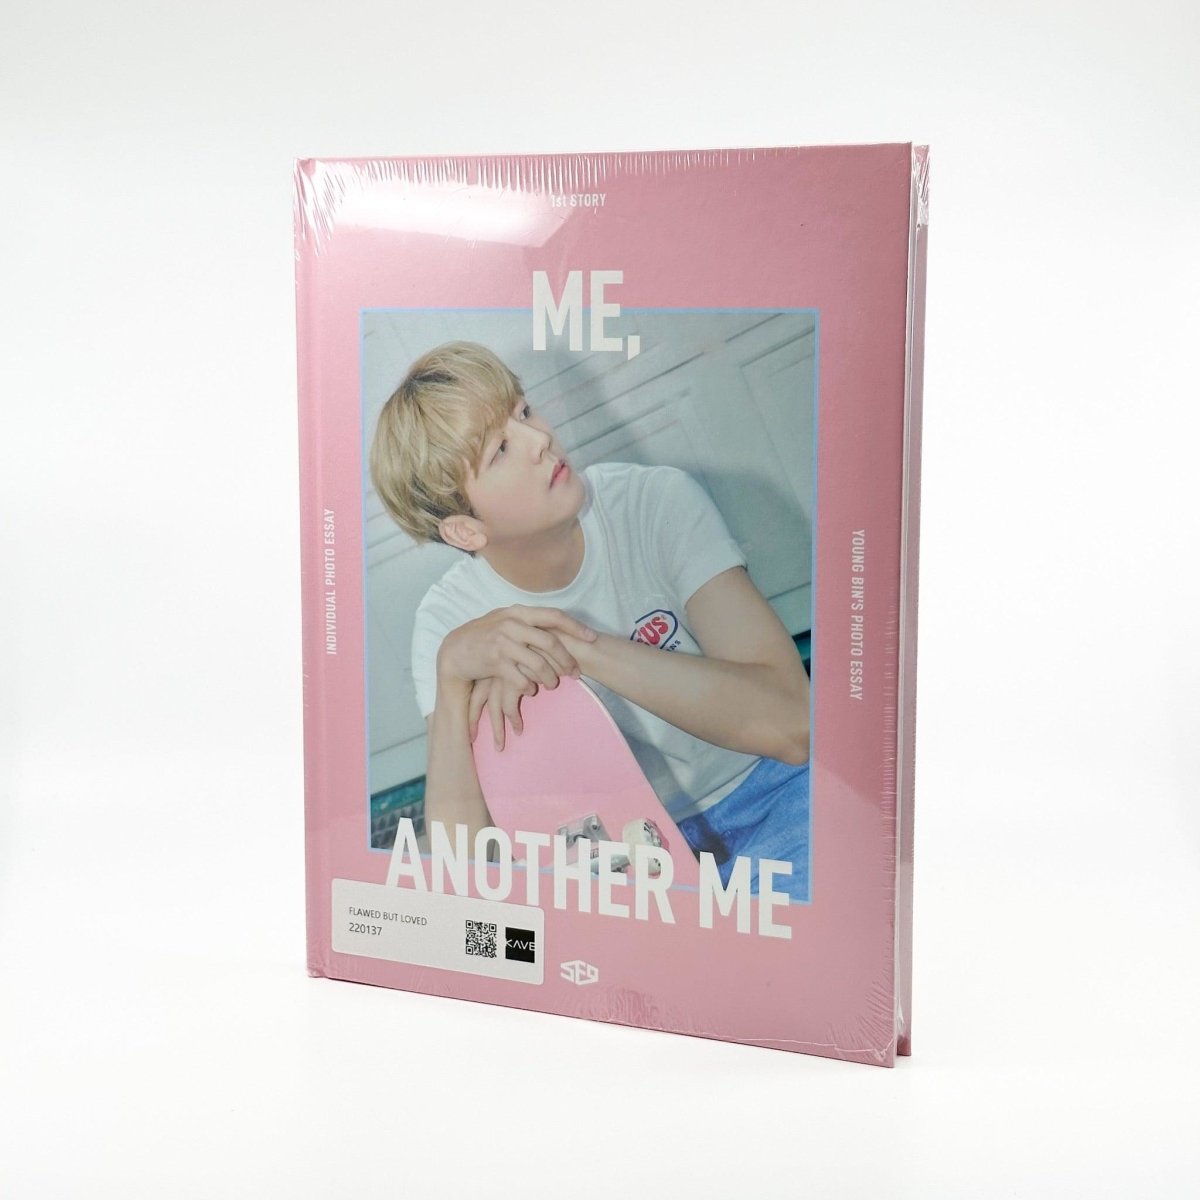 SF9 - YOUNG BIN'S PHOTO ESSAY [ME, ANOTHER ME] FLAWED 220137 - KAVE SQUARE